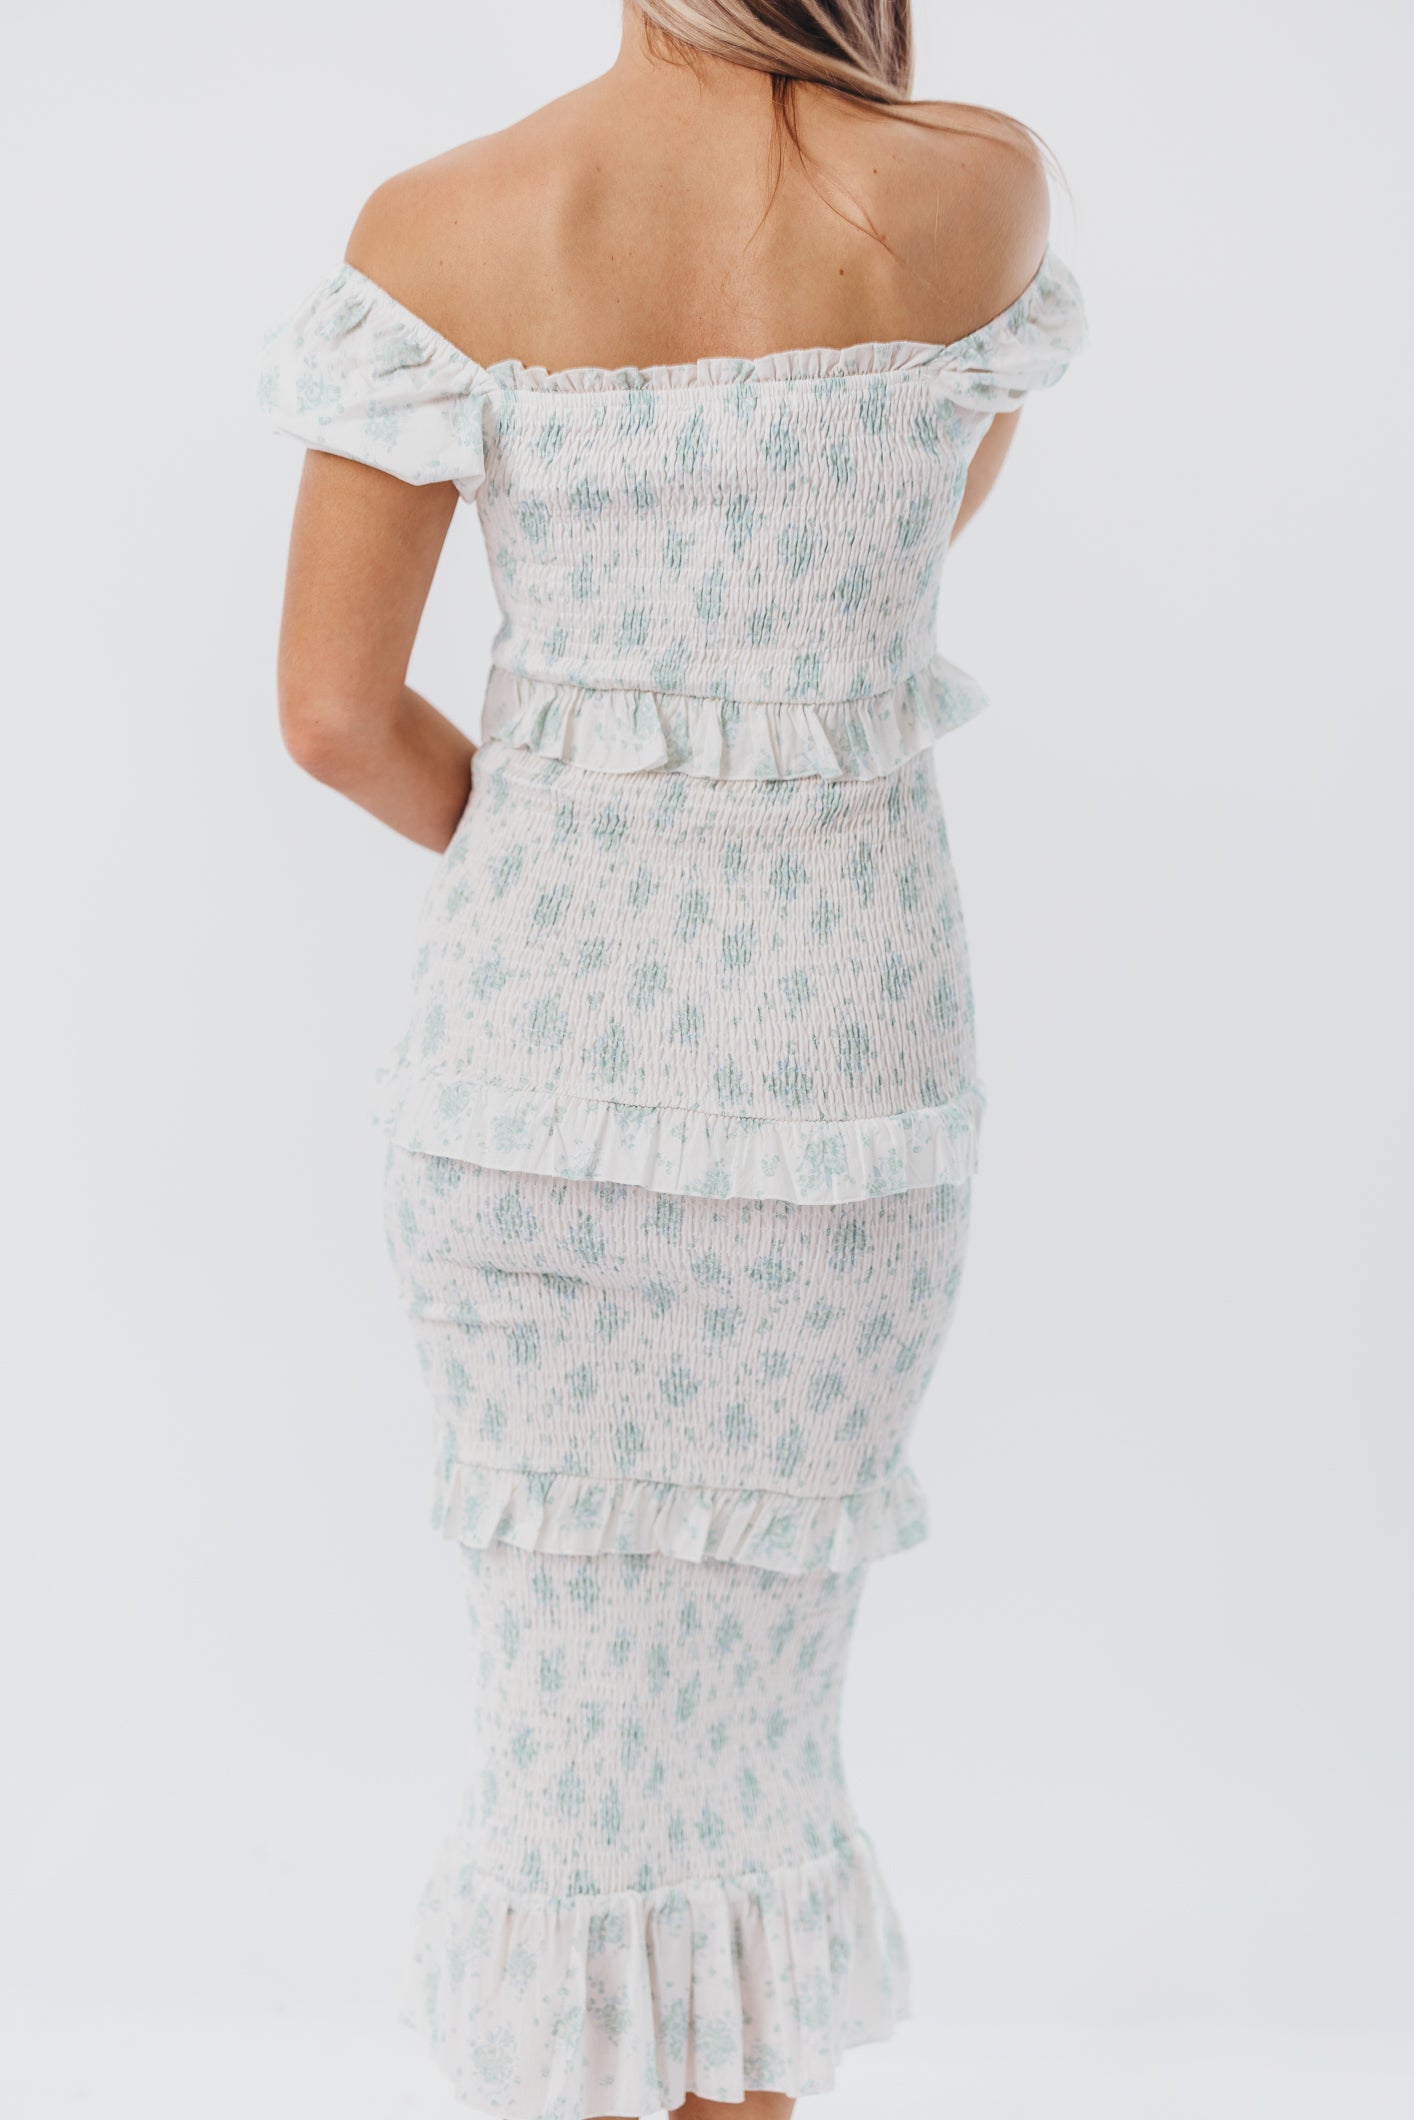 Ada Smocked Dress in Sage Floral - Bump Friendly & Inclusive Sizing (S-1XL)